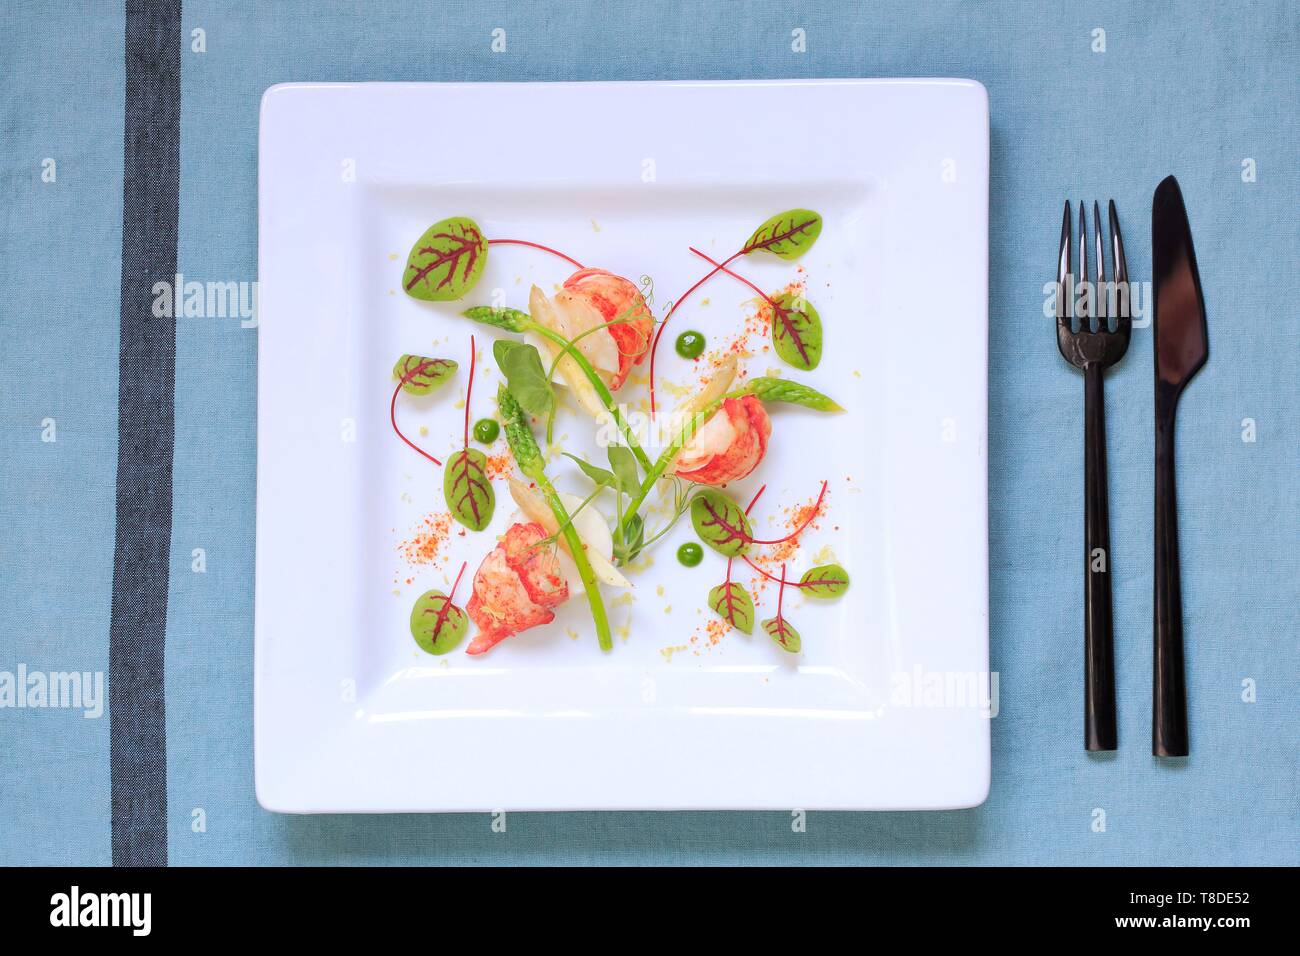 Canada, New Brunswick, Acadie, Moncton, Chef Pierre A. Richard's Little Louis Restaurant, Poached Lobster with Wild Asparagus and Beet Leaves Stock Photo